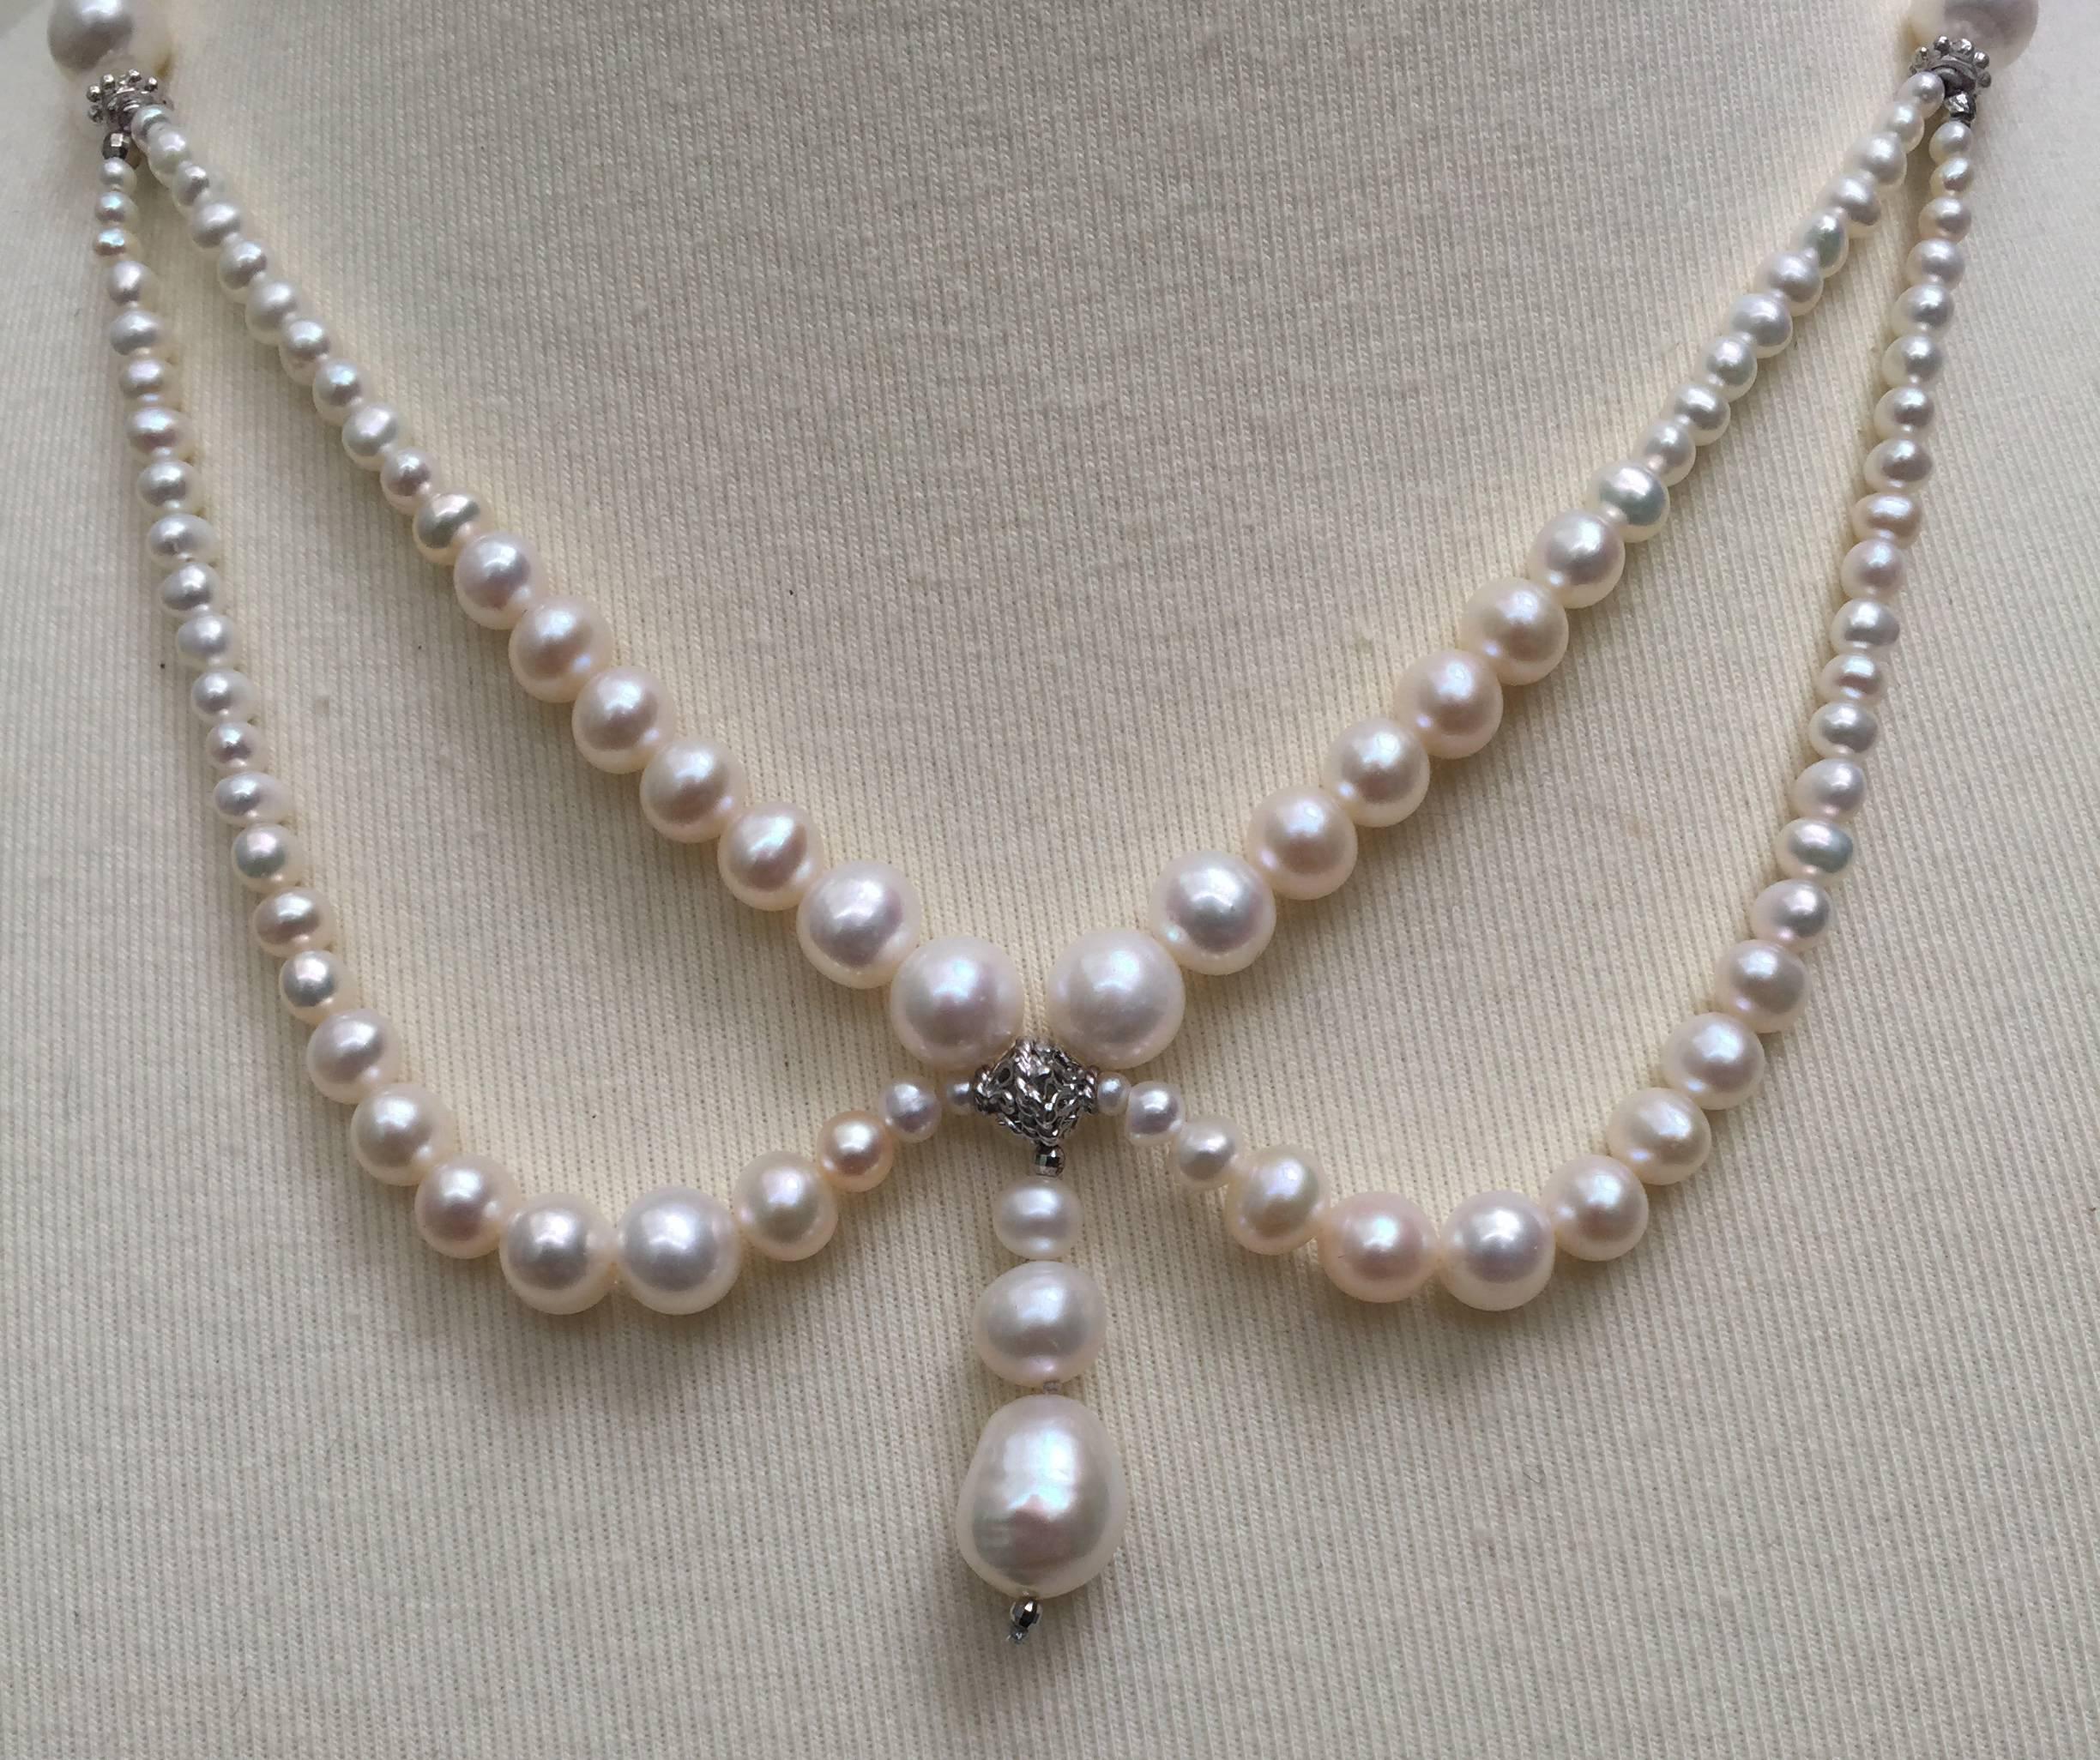 Artist Graduated Pearl Draped Necklace 14 Karat White Golds Beads and Clasp by Marina J